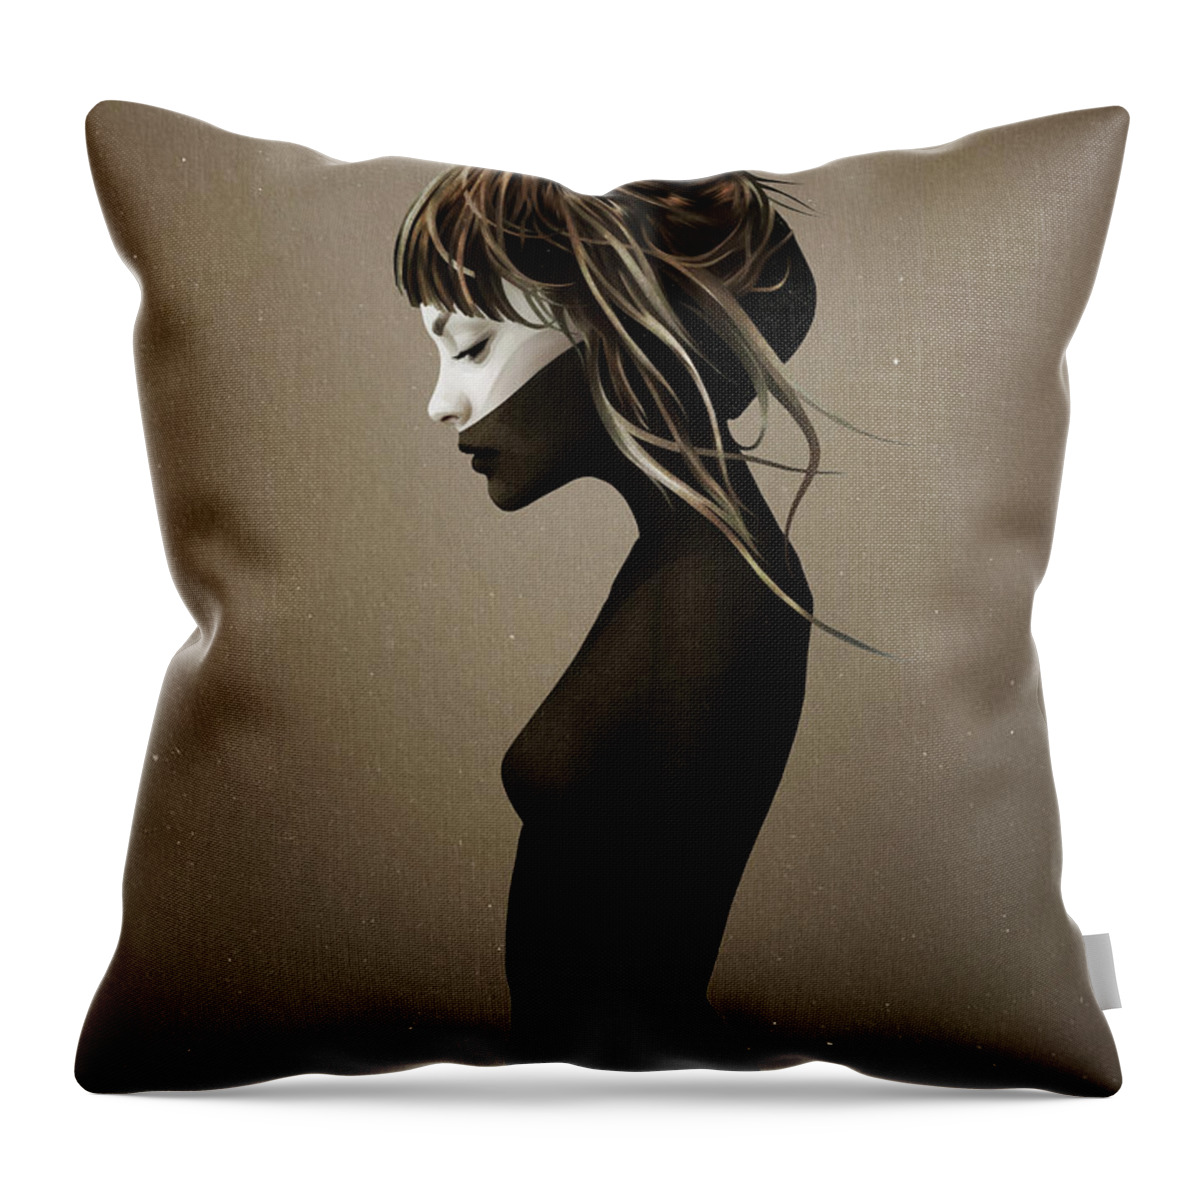 Girl Throw Pillow featuring the digital art This City by Ruben Ireland